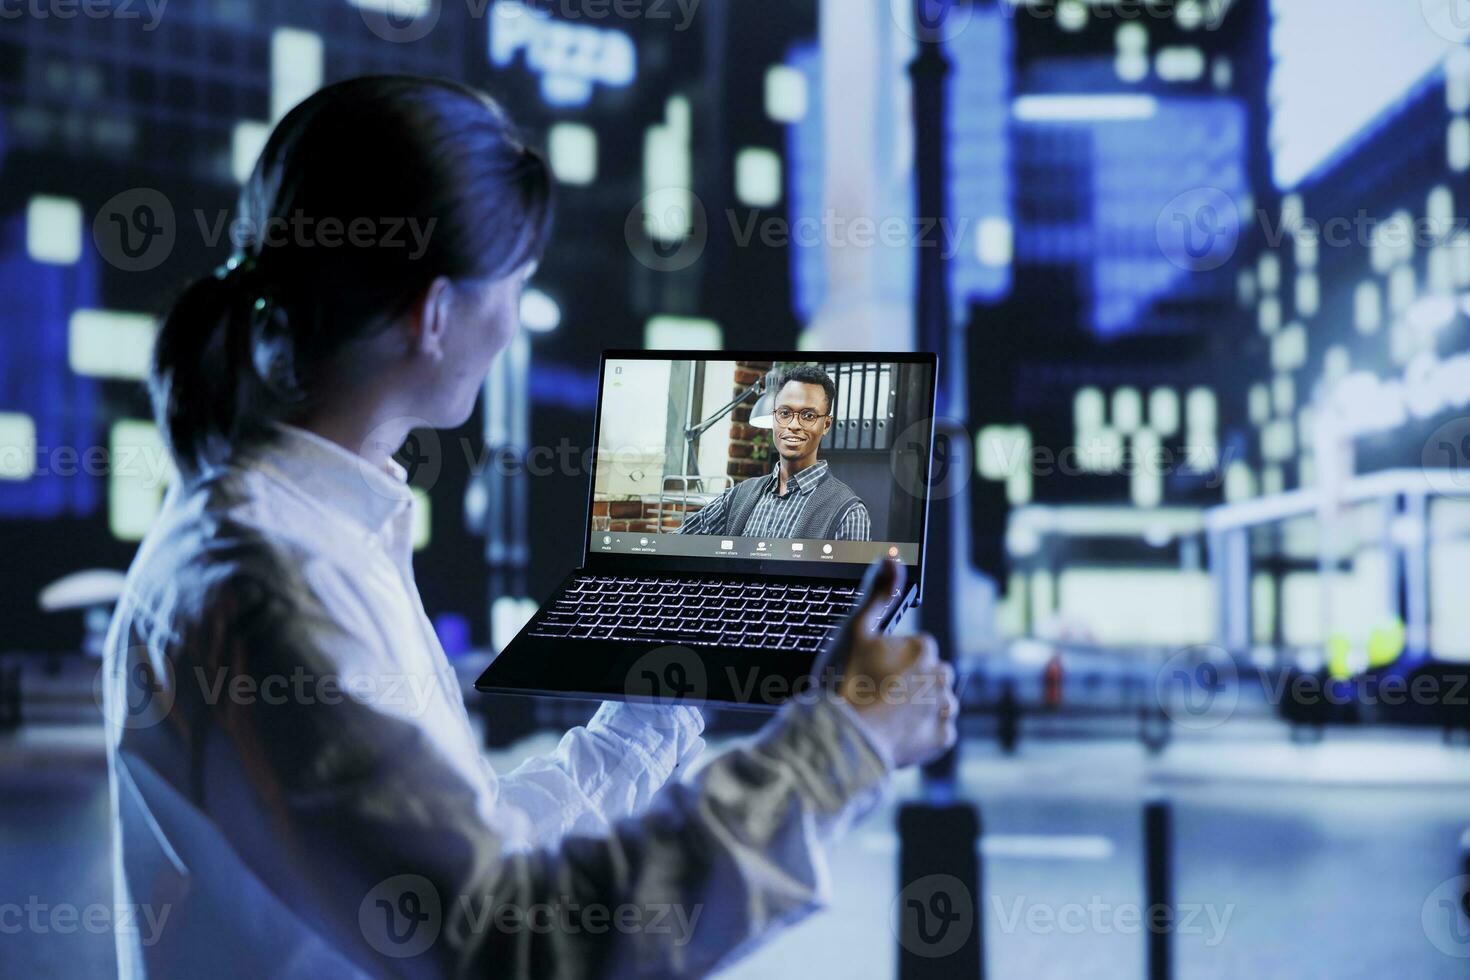 Asian man in videocall with coworker using device while strolling around city streets at night, giving him work updates. Person uses laptop to show colleague surroundings in illuminated urban district photo